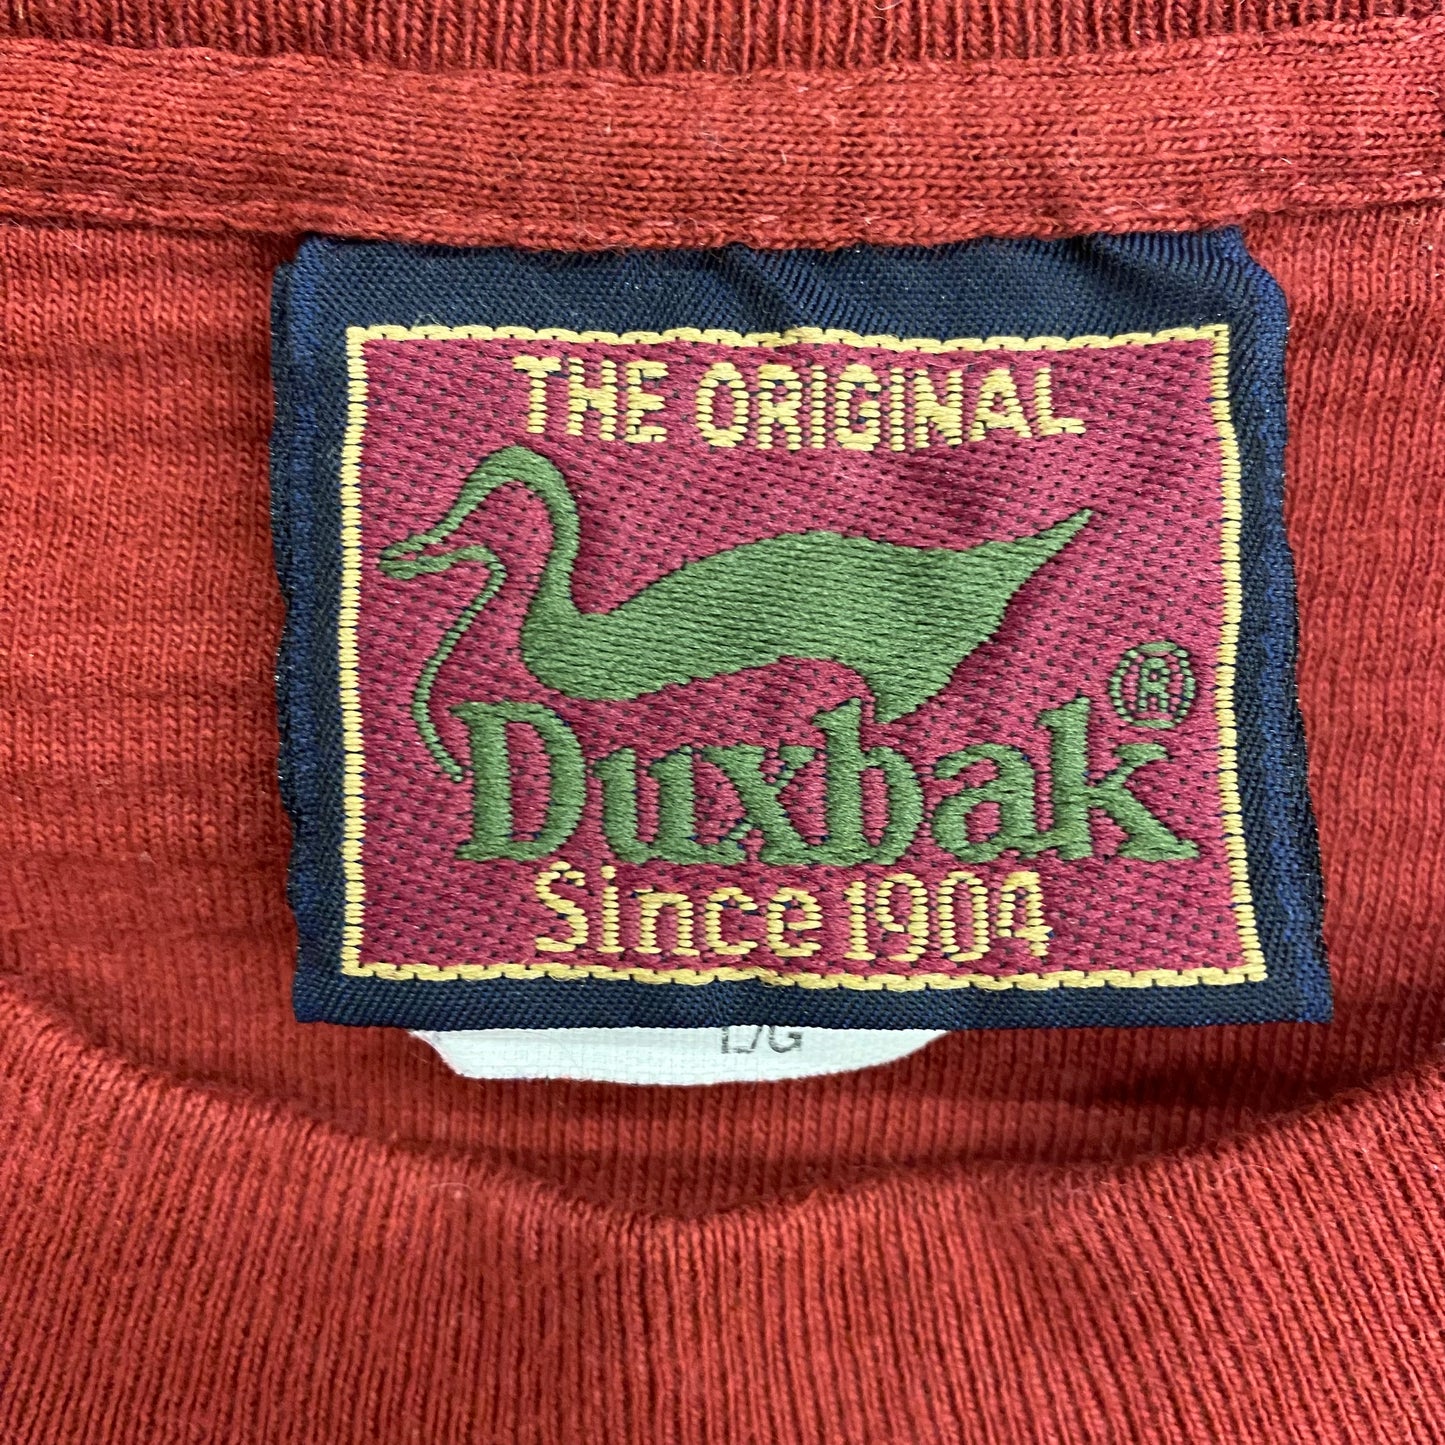 Vintage 1990s Duxbak "Opening Day" Red Single Stitch Tee - Size Large (Fits XL)